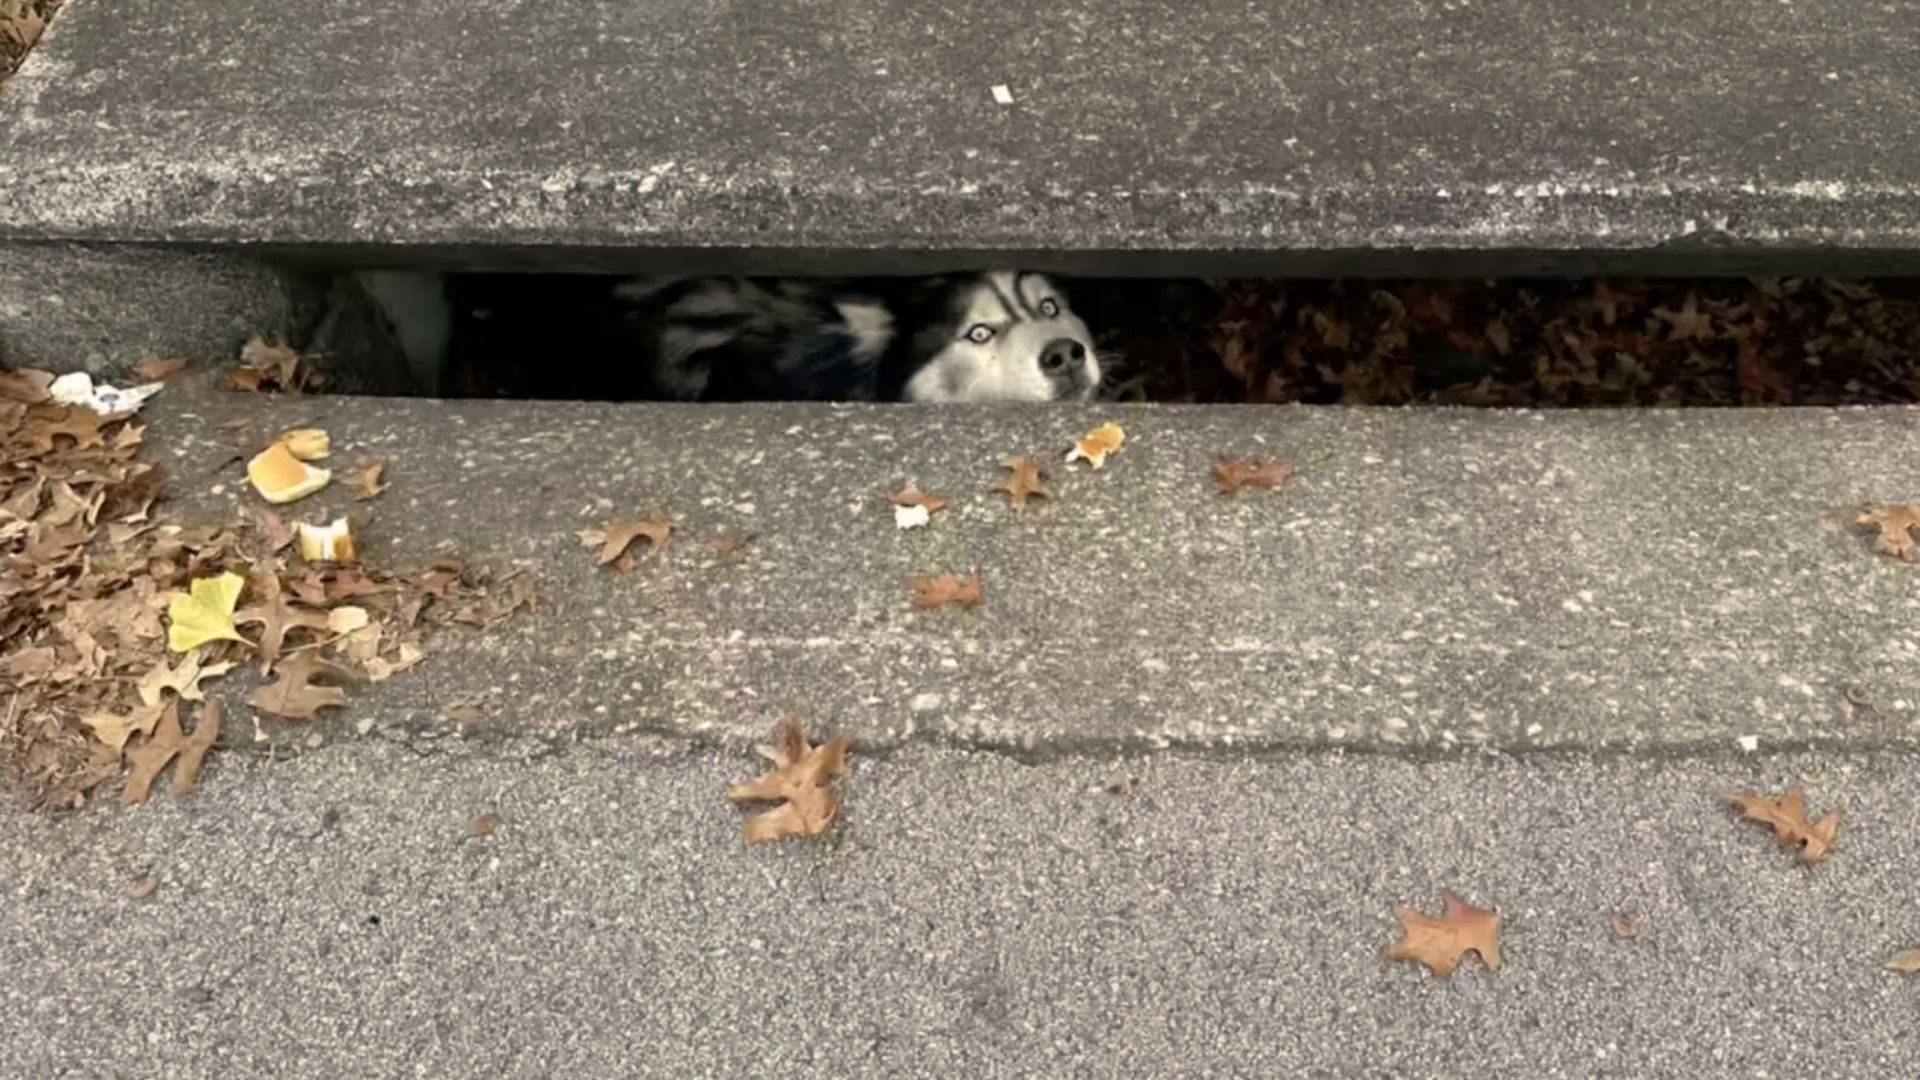 A Furry Head Sticking Out Of The Sewer Resulted In A Rescue Mission